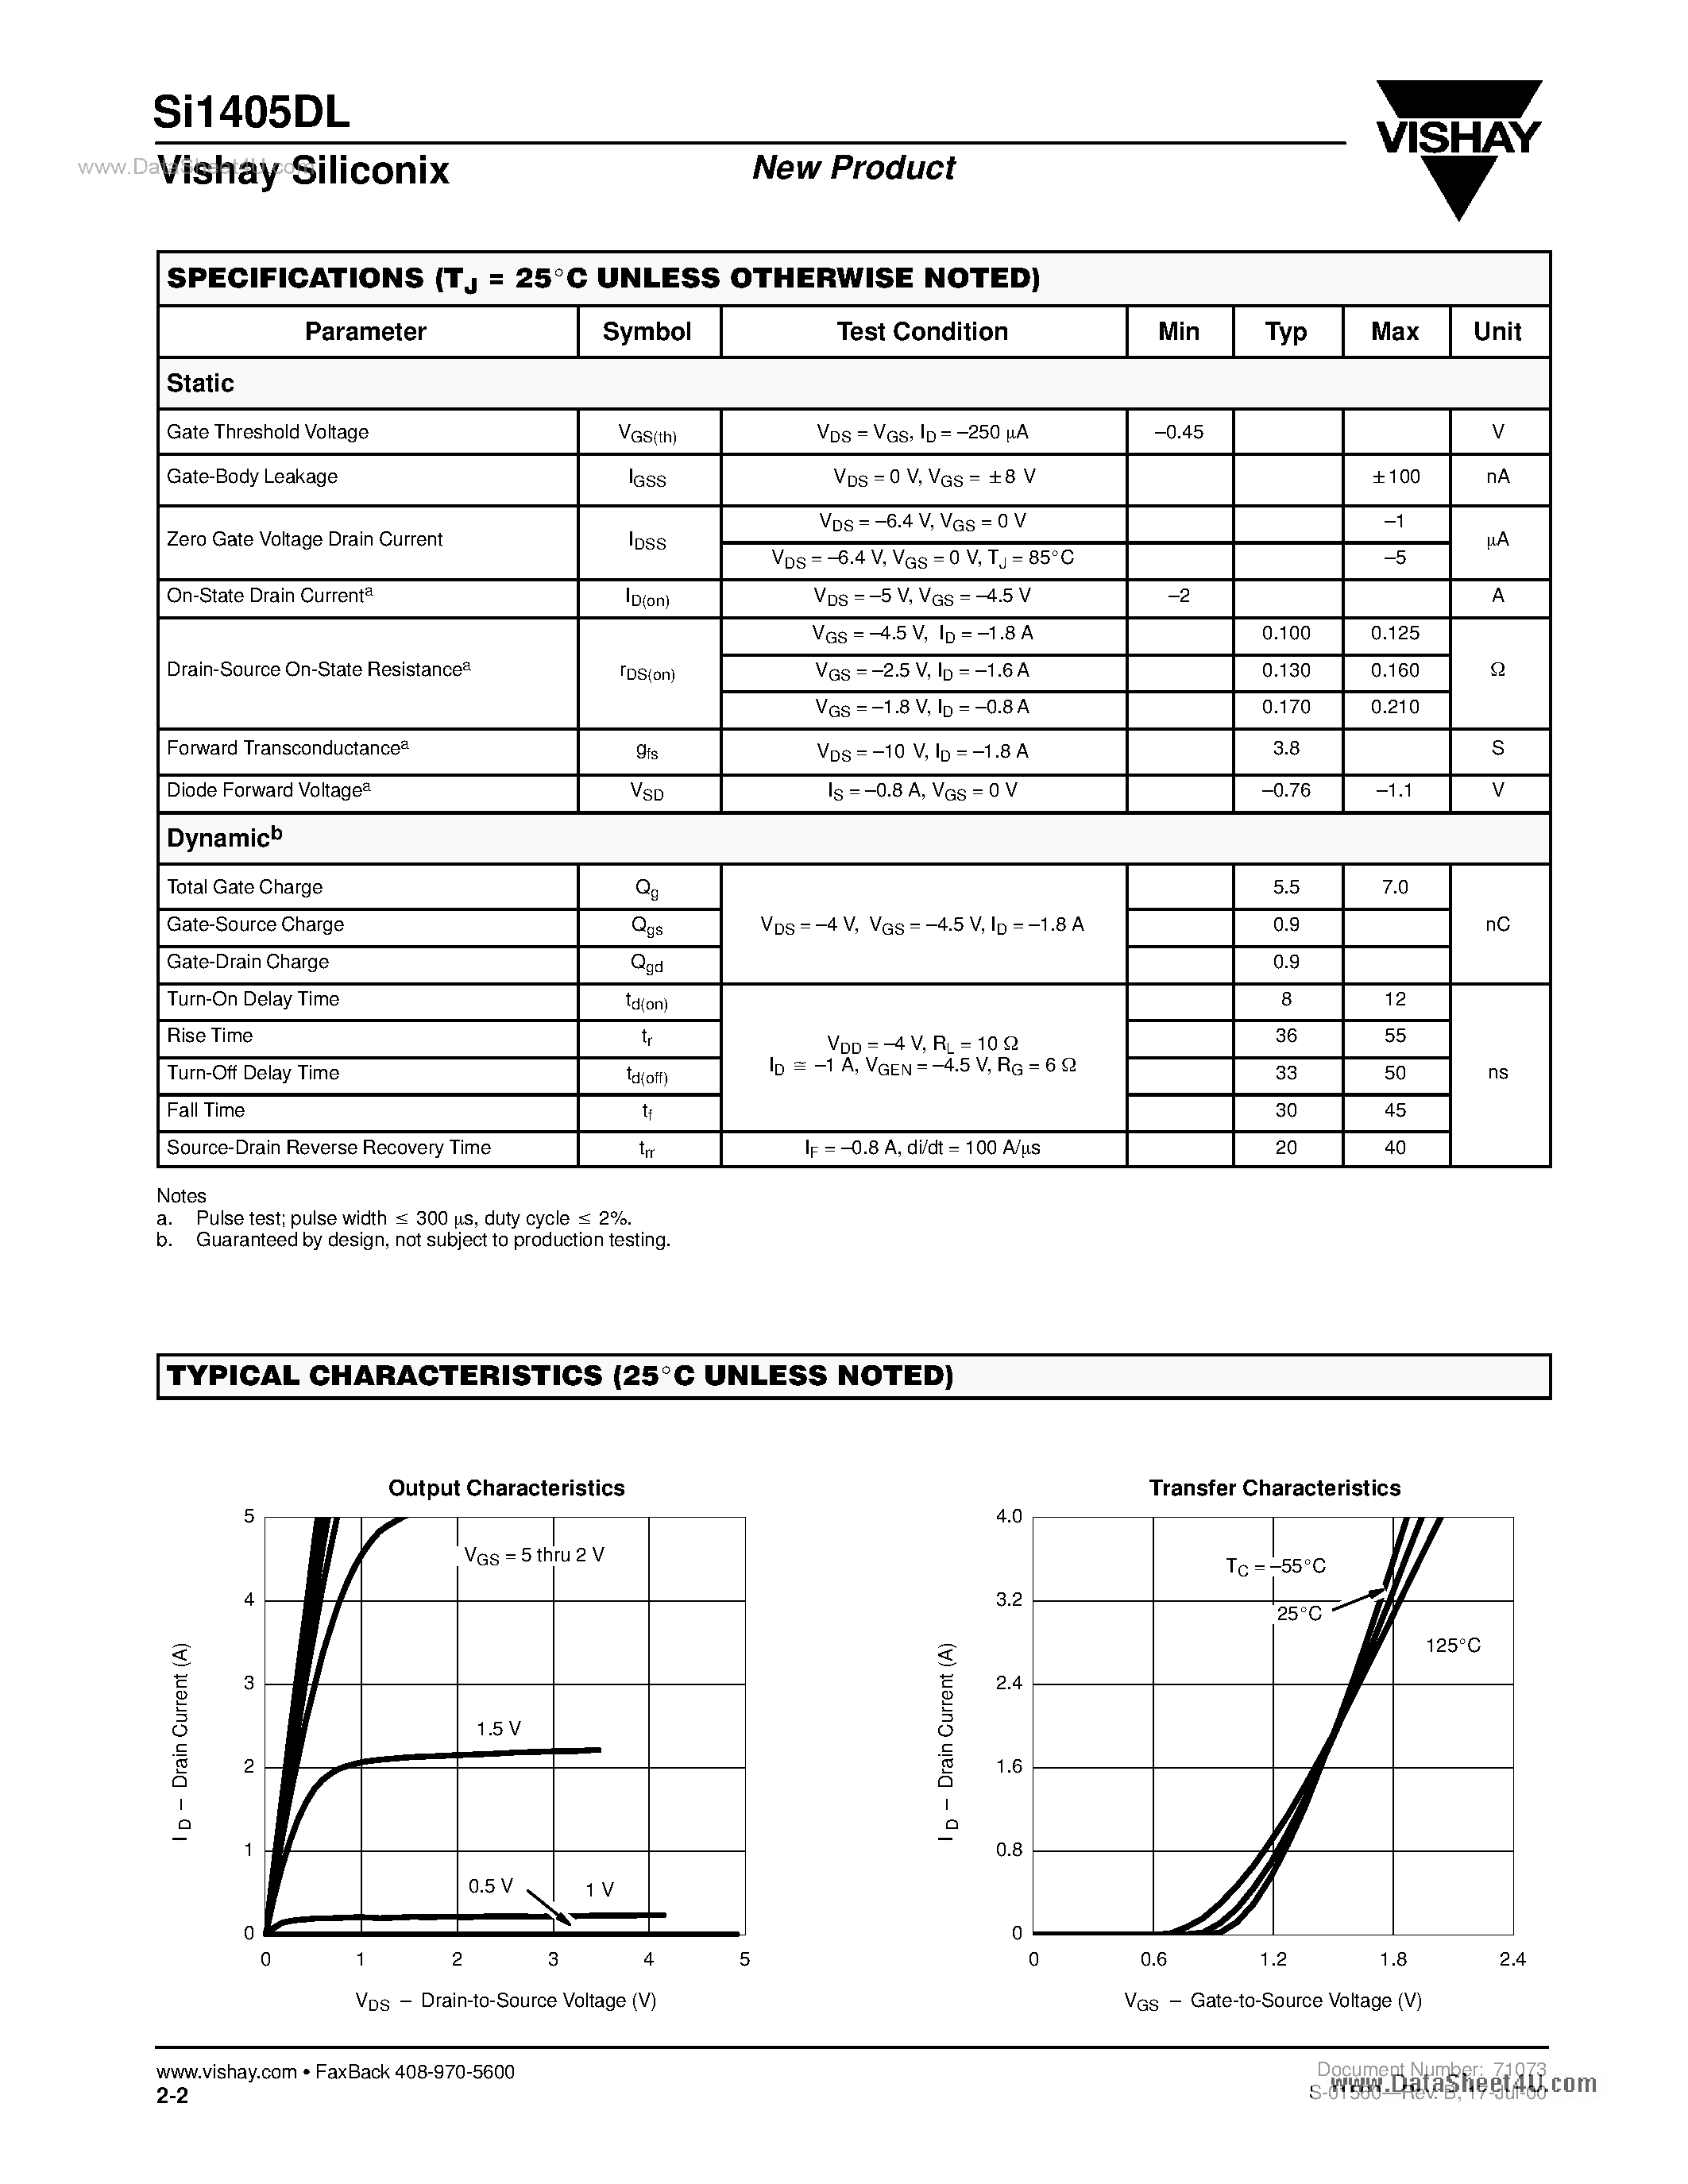 Datasheet SI1405DL - P-Channel 1.8-V (G-S) MOSFET page 2